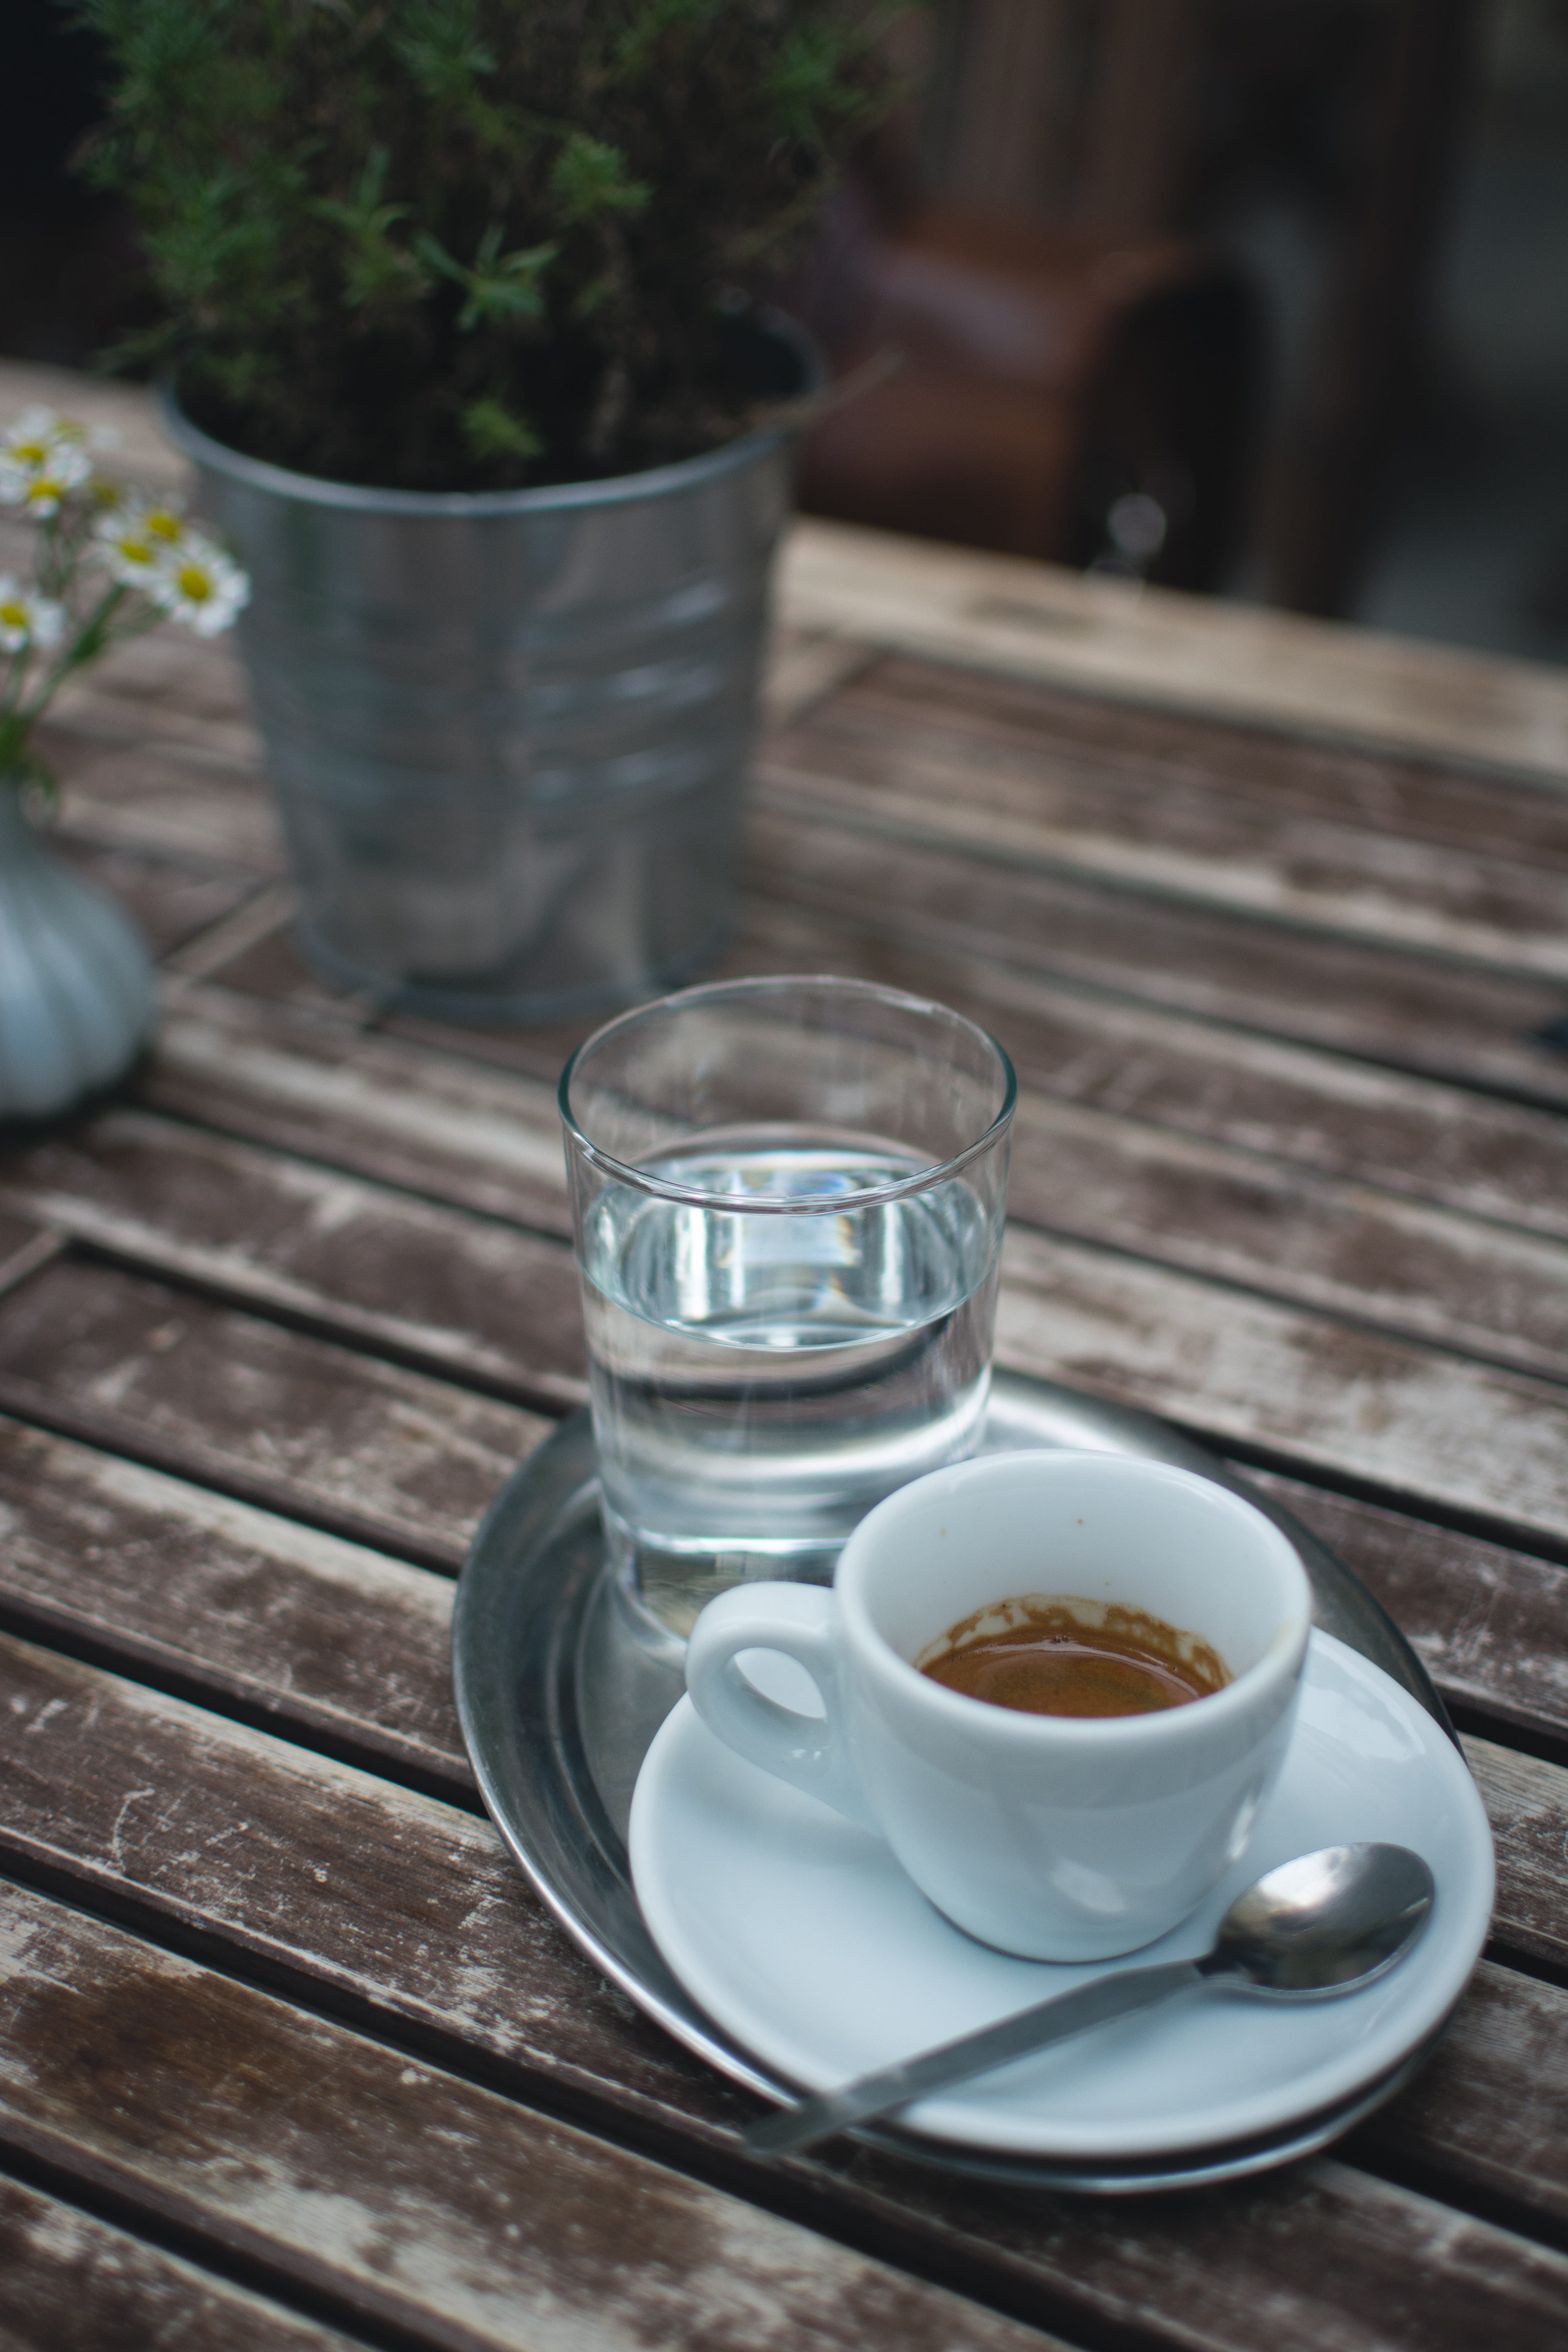 Coffee espresso on a wooden table, outside, cup, drink, wood - Material